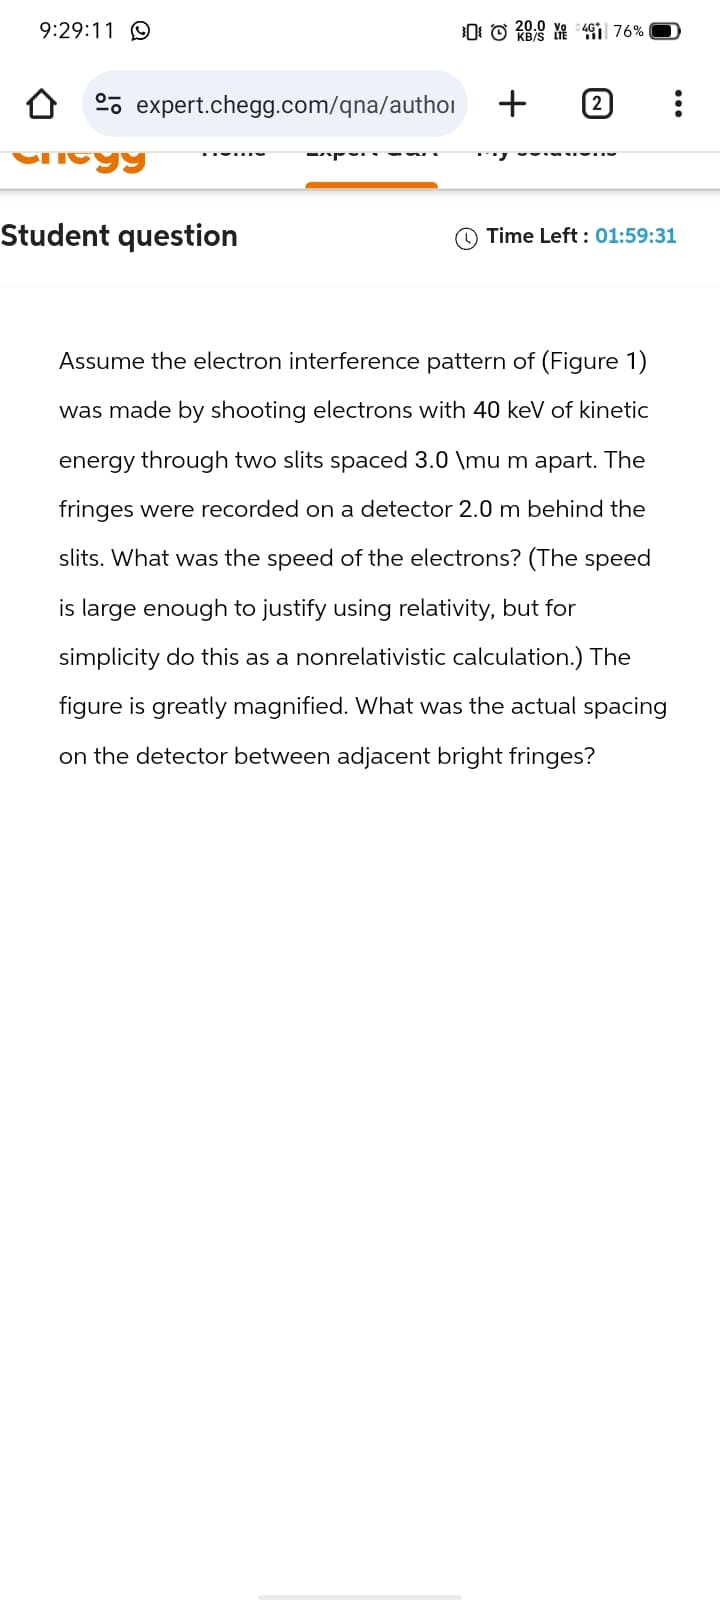 9:29:11 9
expert.chegg.com/qna/author
Cheyy
Student question
-
KB/S LTE
476%
+
[2]
Time Left: 01:59:31
Assume the electron interference pattern of (Figure 1)
was made by shooting electrons with 40 keV of kinetic
energy through two slits spaced 3.0 \mu m apart. The
fringes were recorded on a detector 2.0 m behind the
slits. What was the speed of the electrons? (The speed
is large enough to justify using relativity, but for
simplicity do this as a nonrelativistic calculation.) The
figure is greatly magnified. What was the actual spacing
on the detector between adjacent bright fringes?